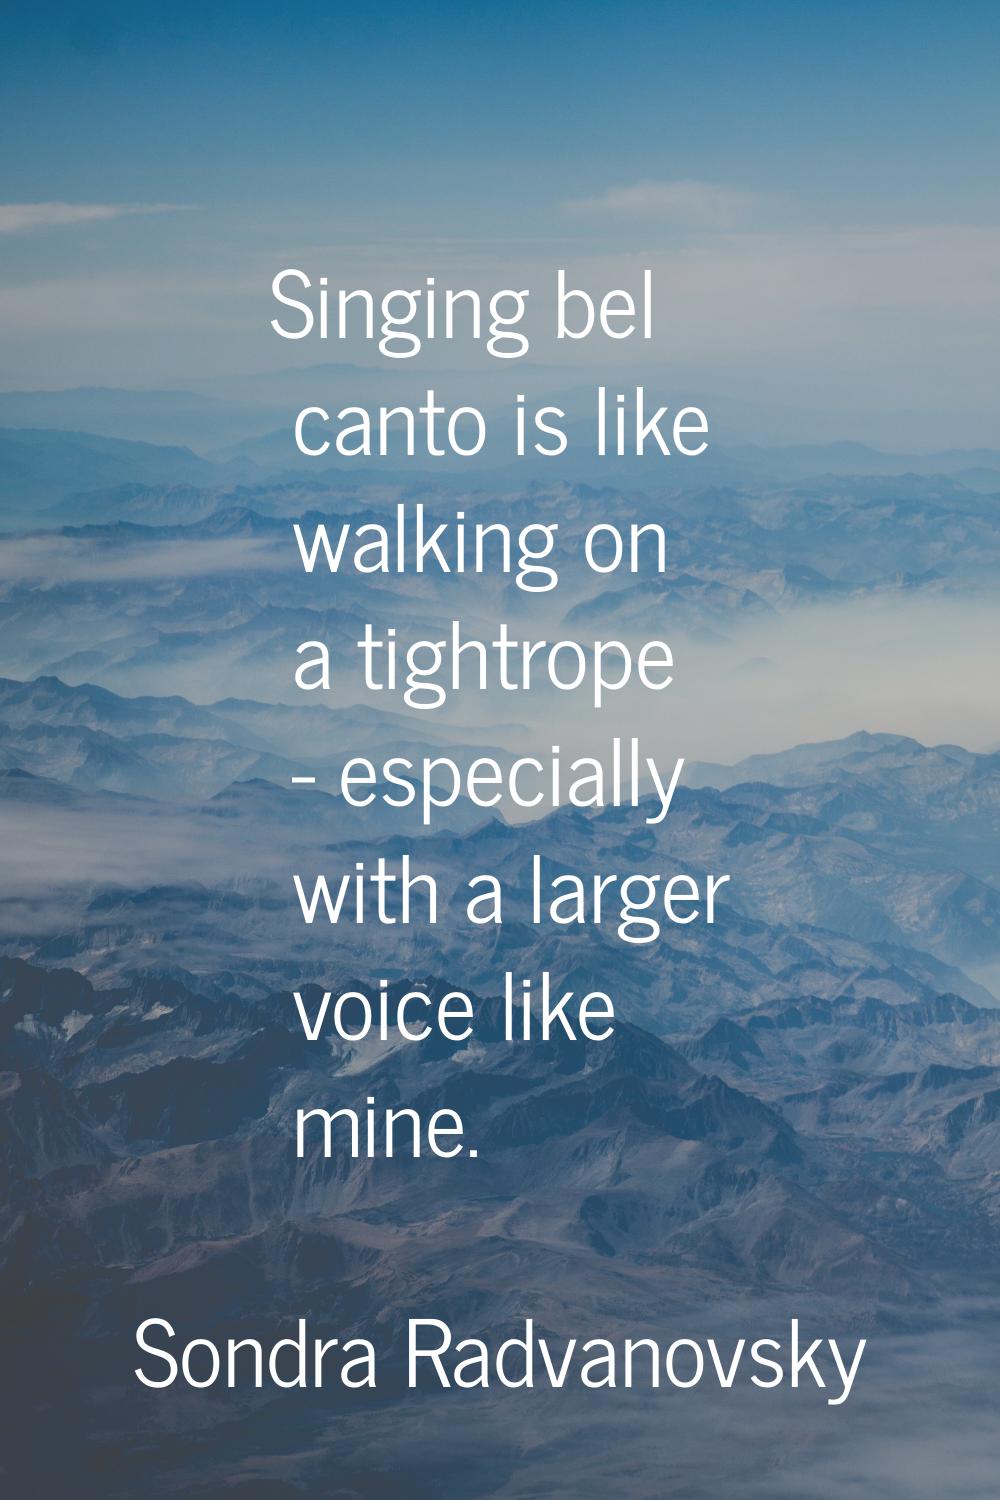 Singing bel canto is like walking on a tightrope - especially with a larger voice like mine.